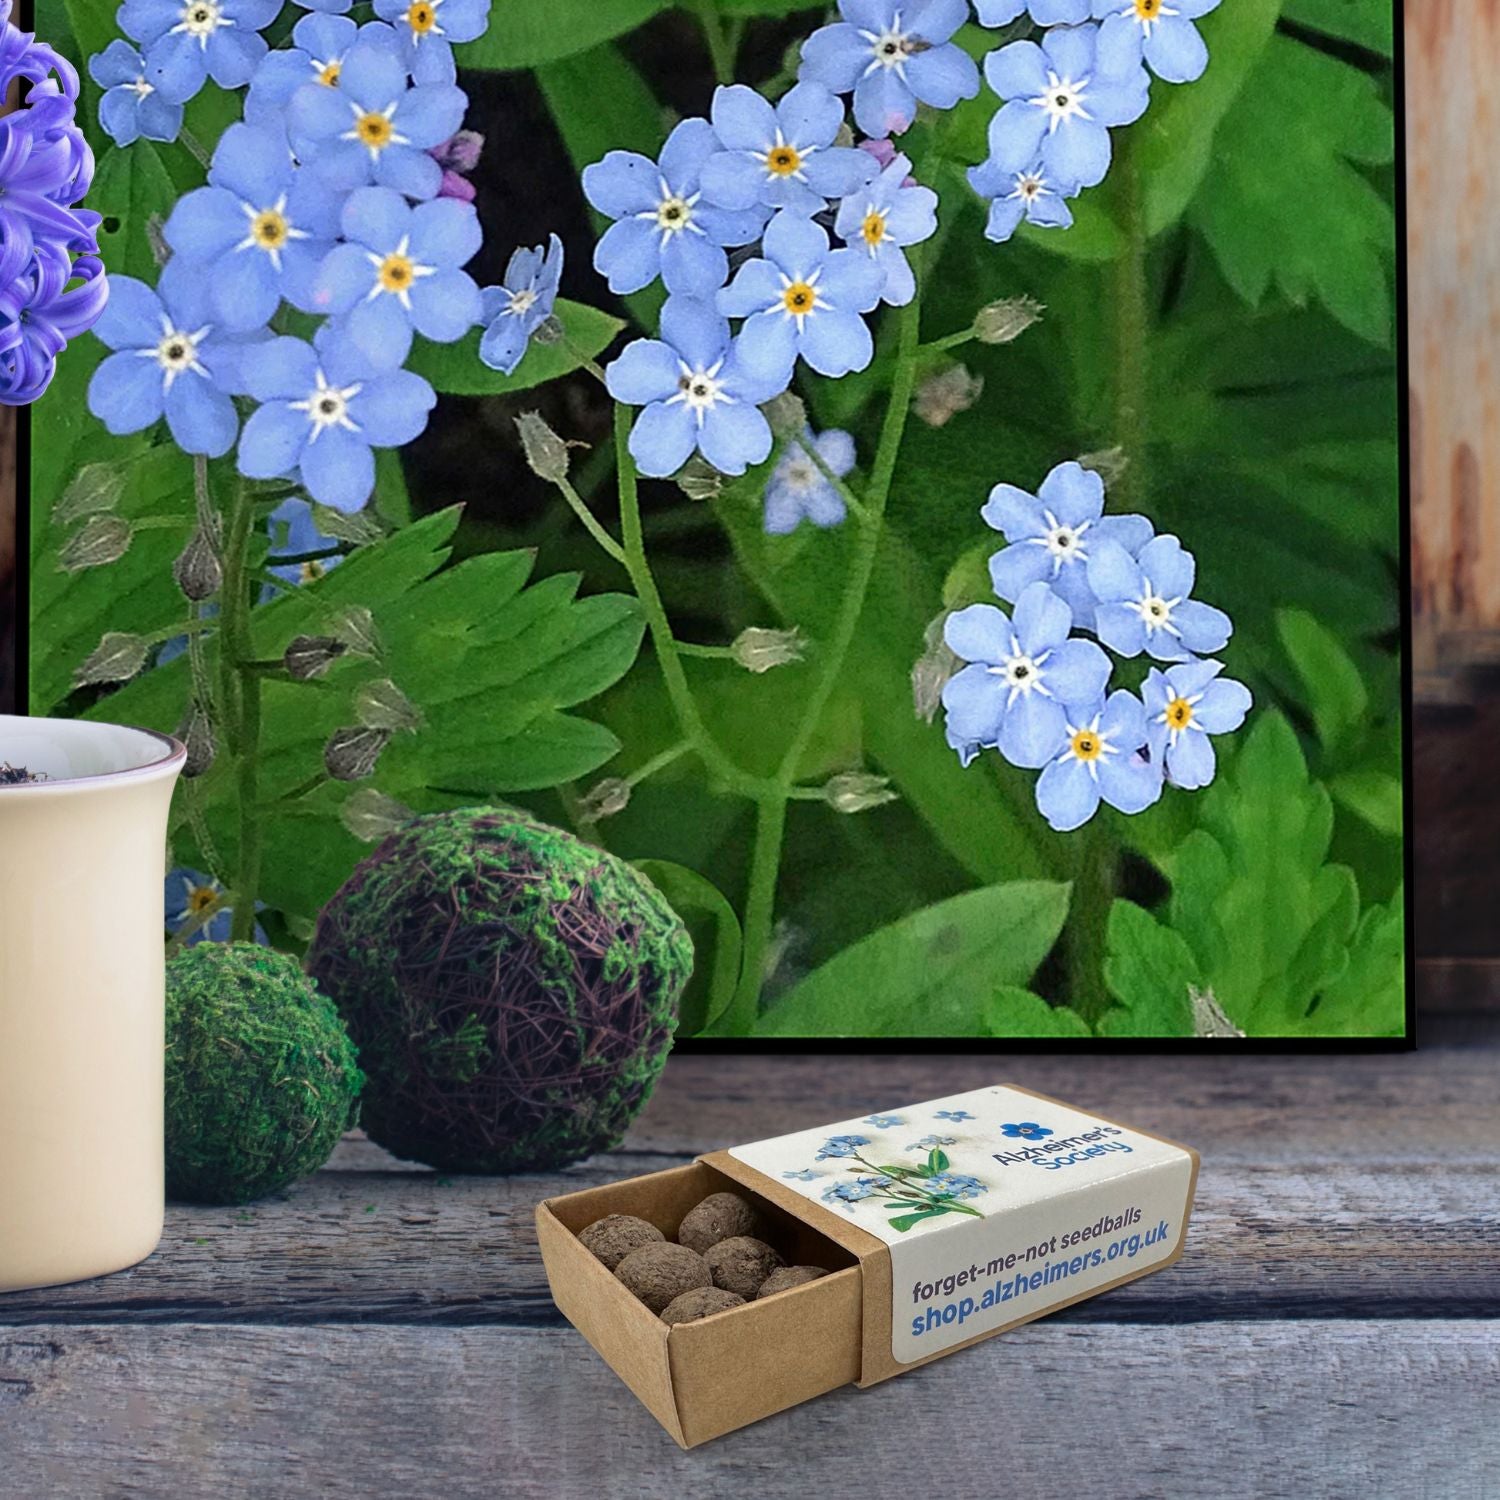 Forget-me-not gifts such as forget-me-not seeds from Alzheimer's Society